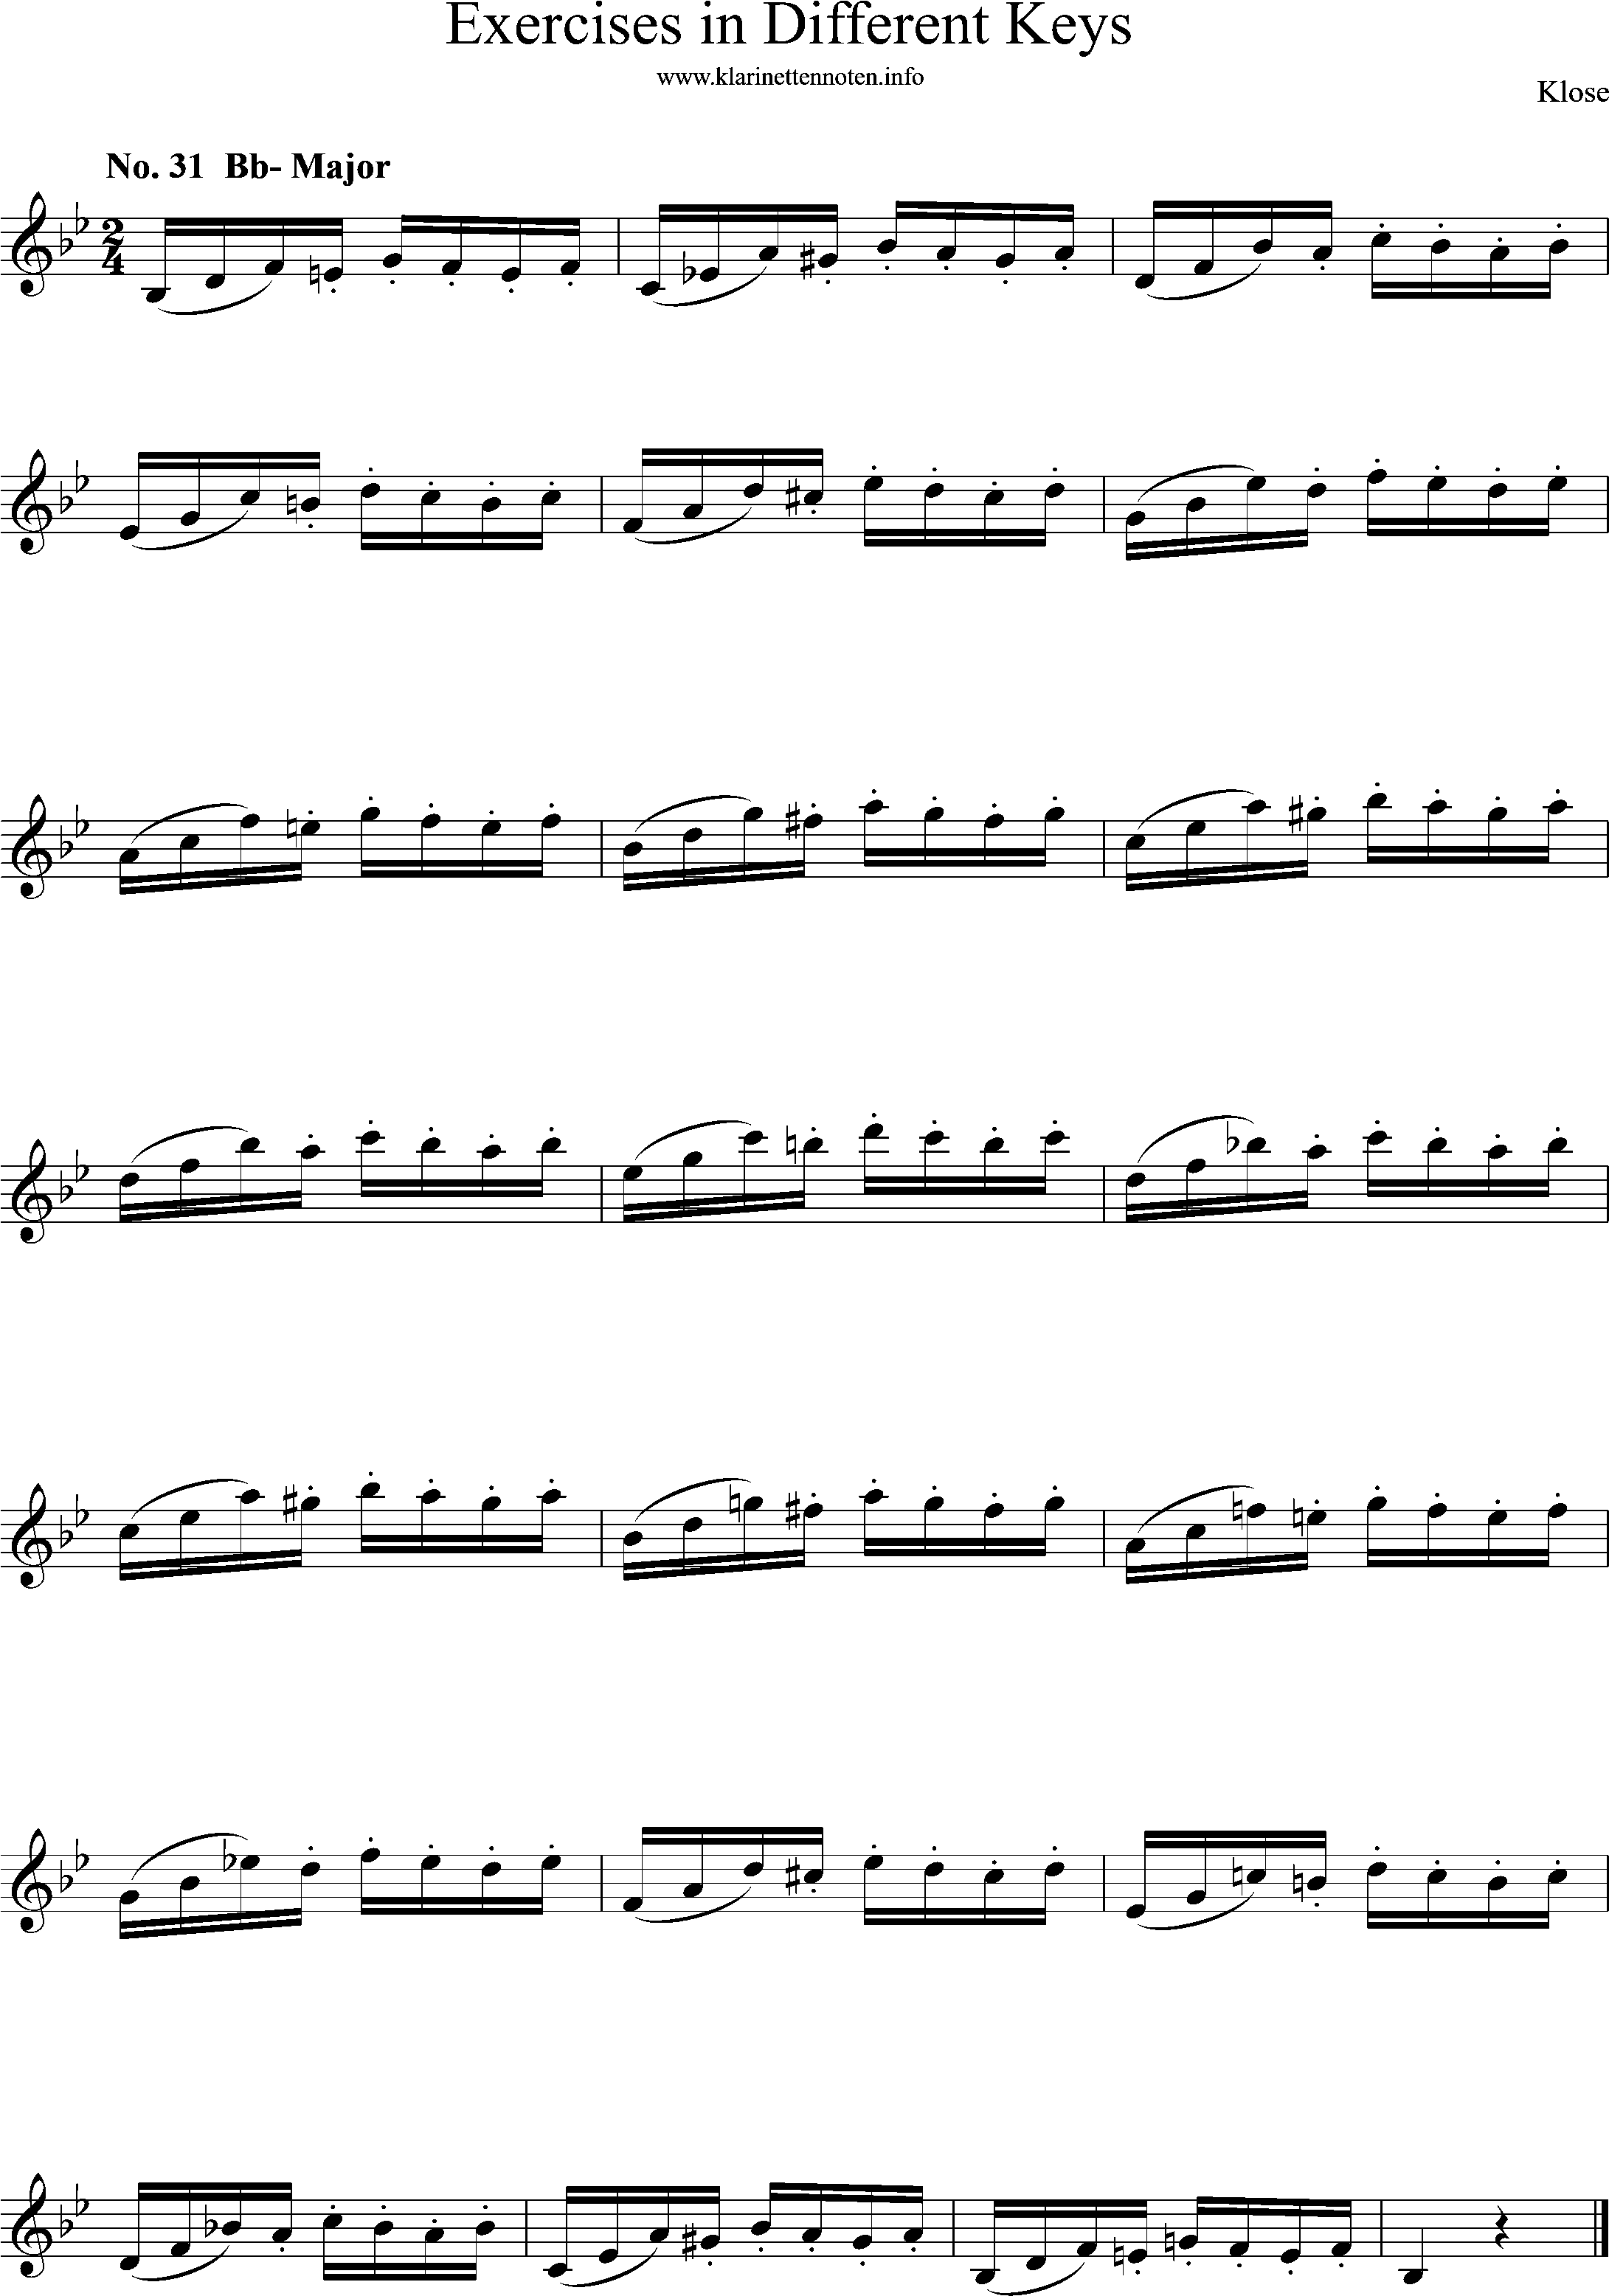 Exercises in Differewnt Keys, klose, No-31, Bb-major